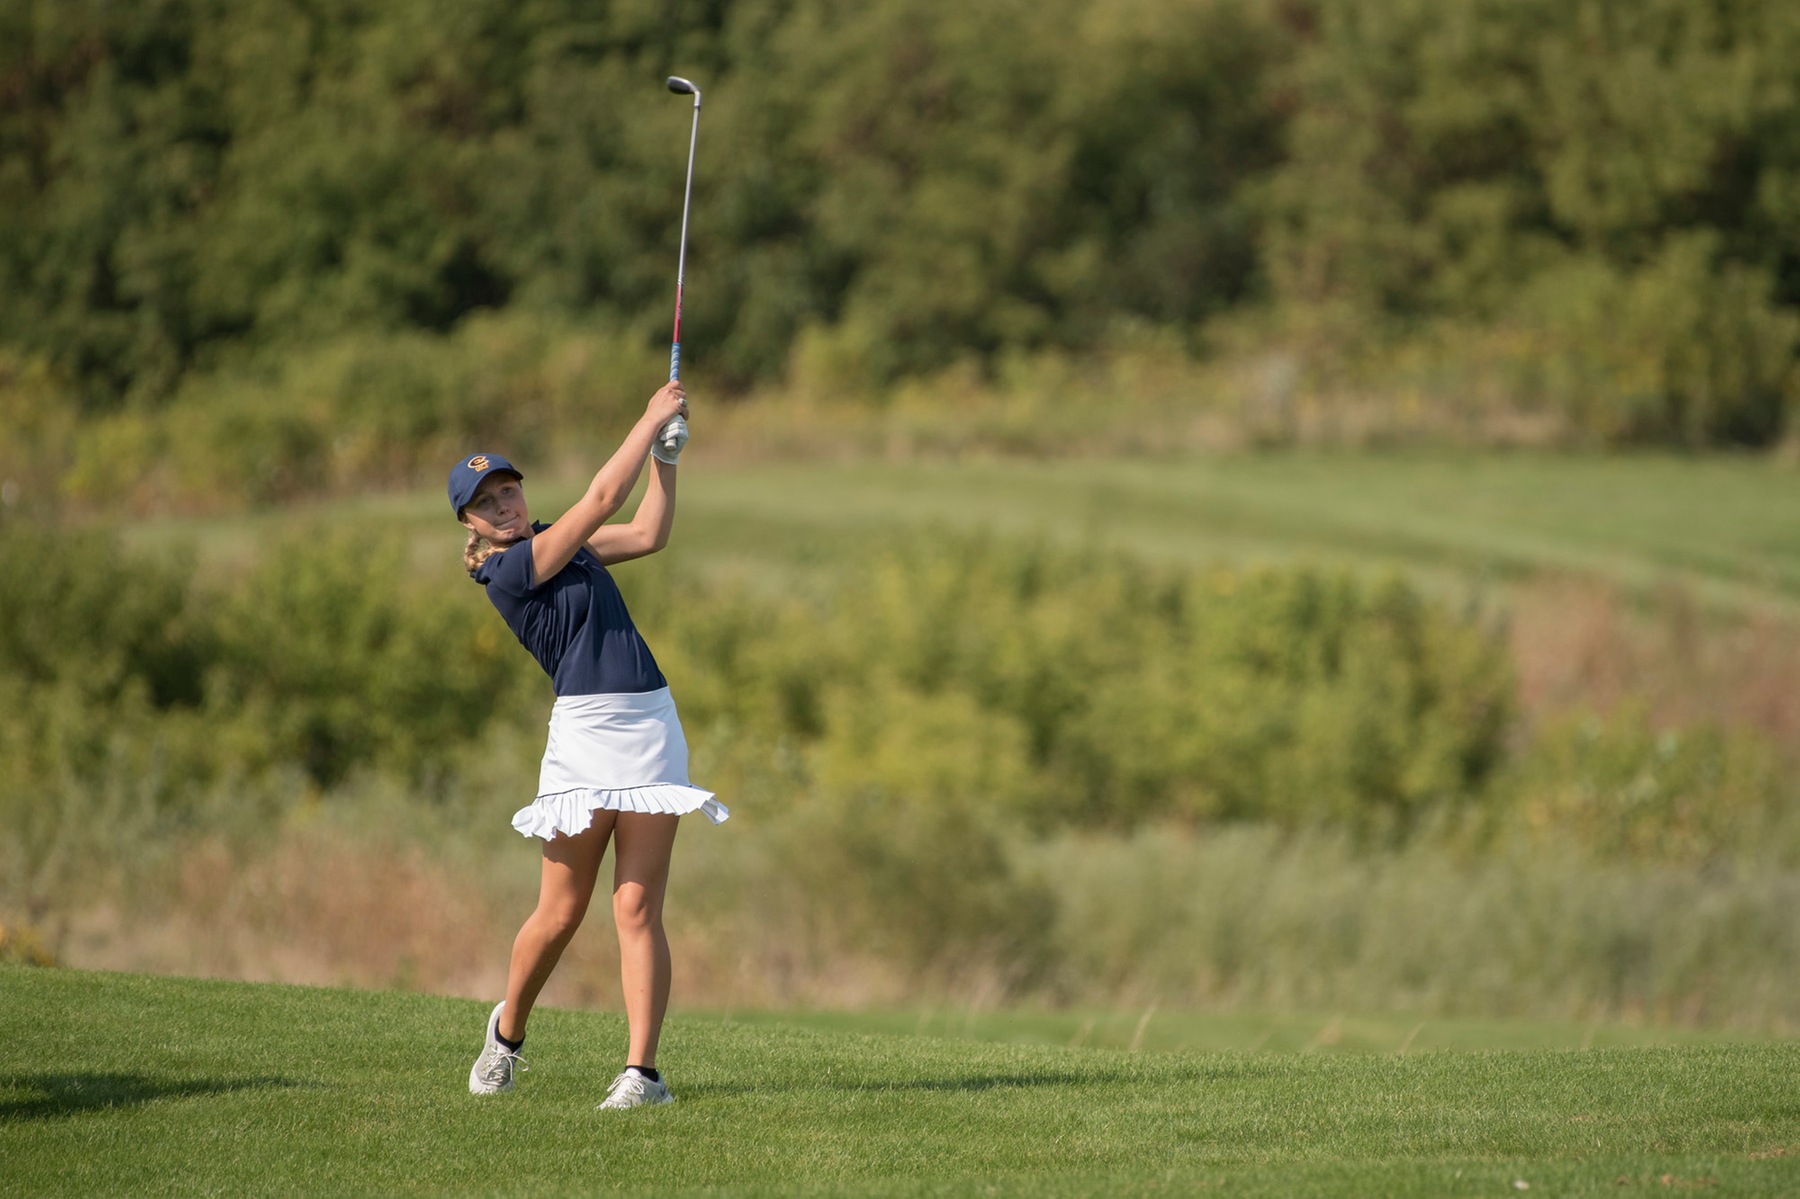 Women's Golf in 4th after round 1 of Mad Dawg Invite